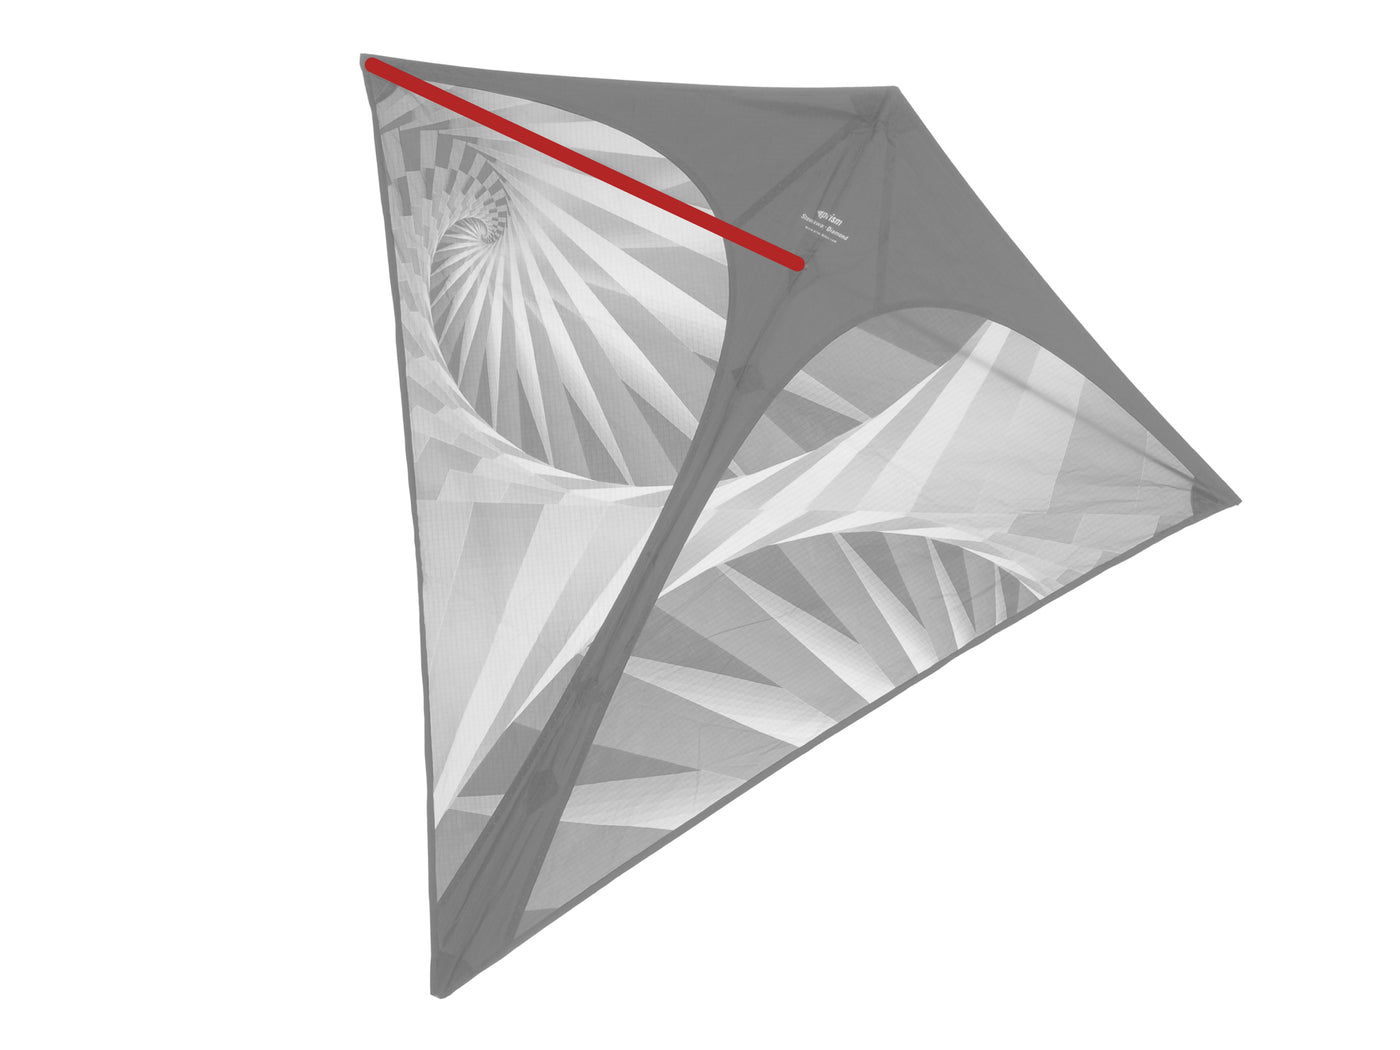 Diagram showing location of the Stowaway Diamond Spreader on the kite.